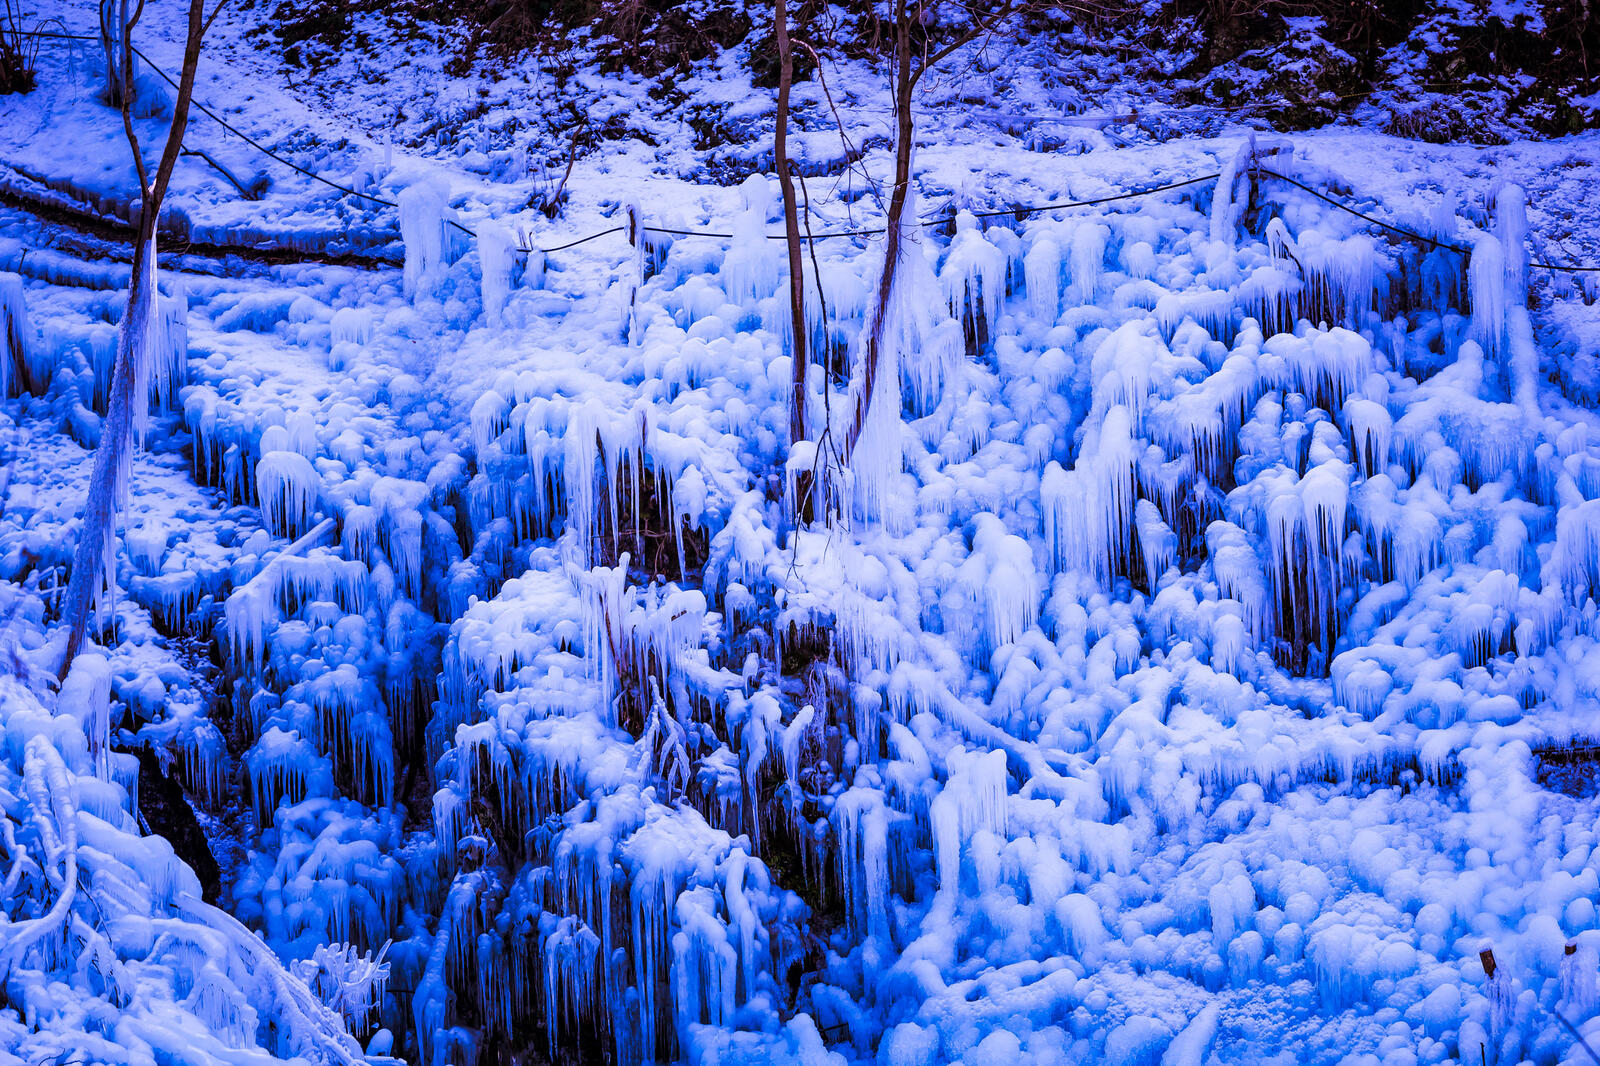 Wallpapers Inclination filled with icicles Asigakubo on the desktop